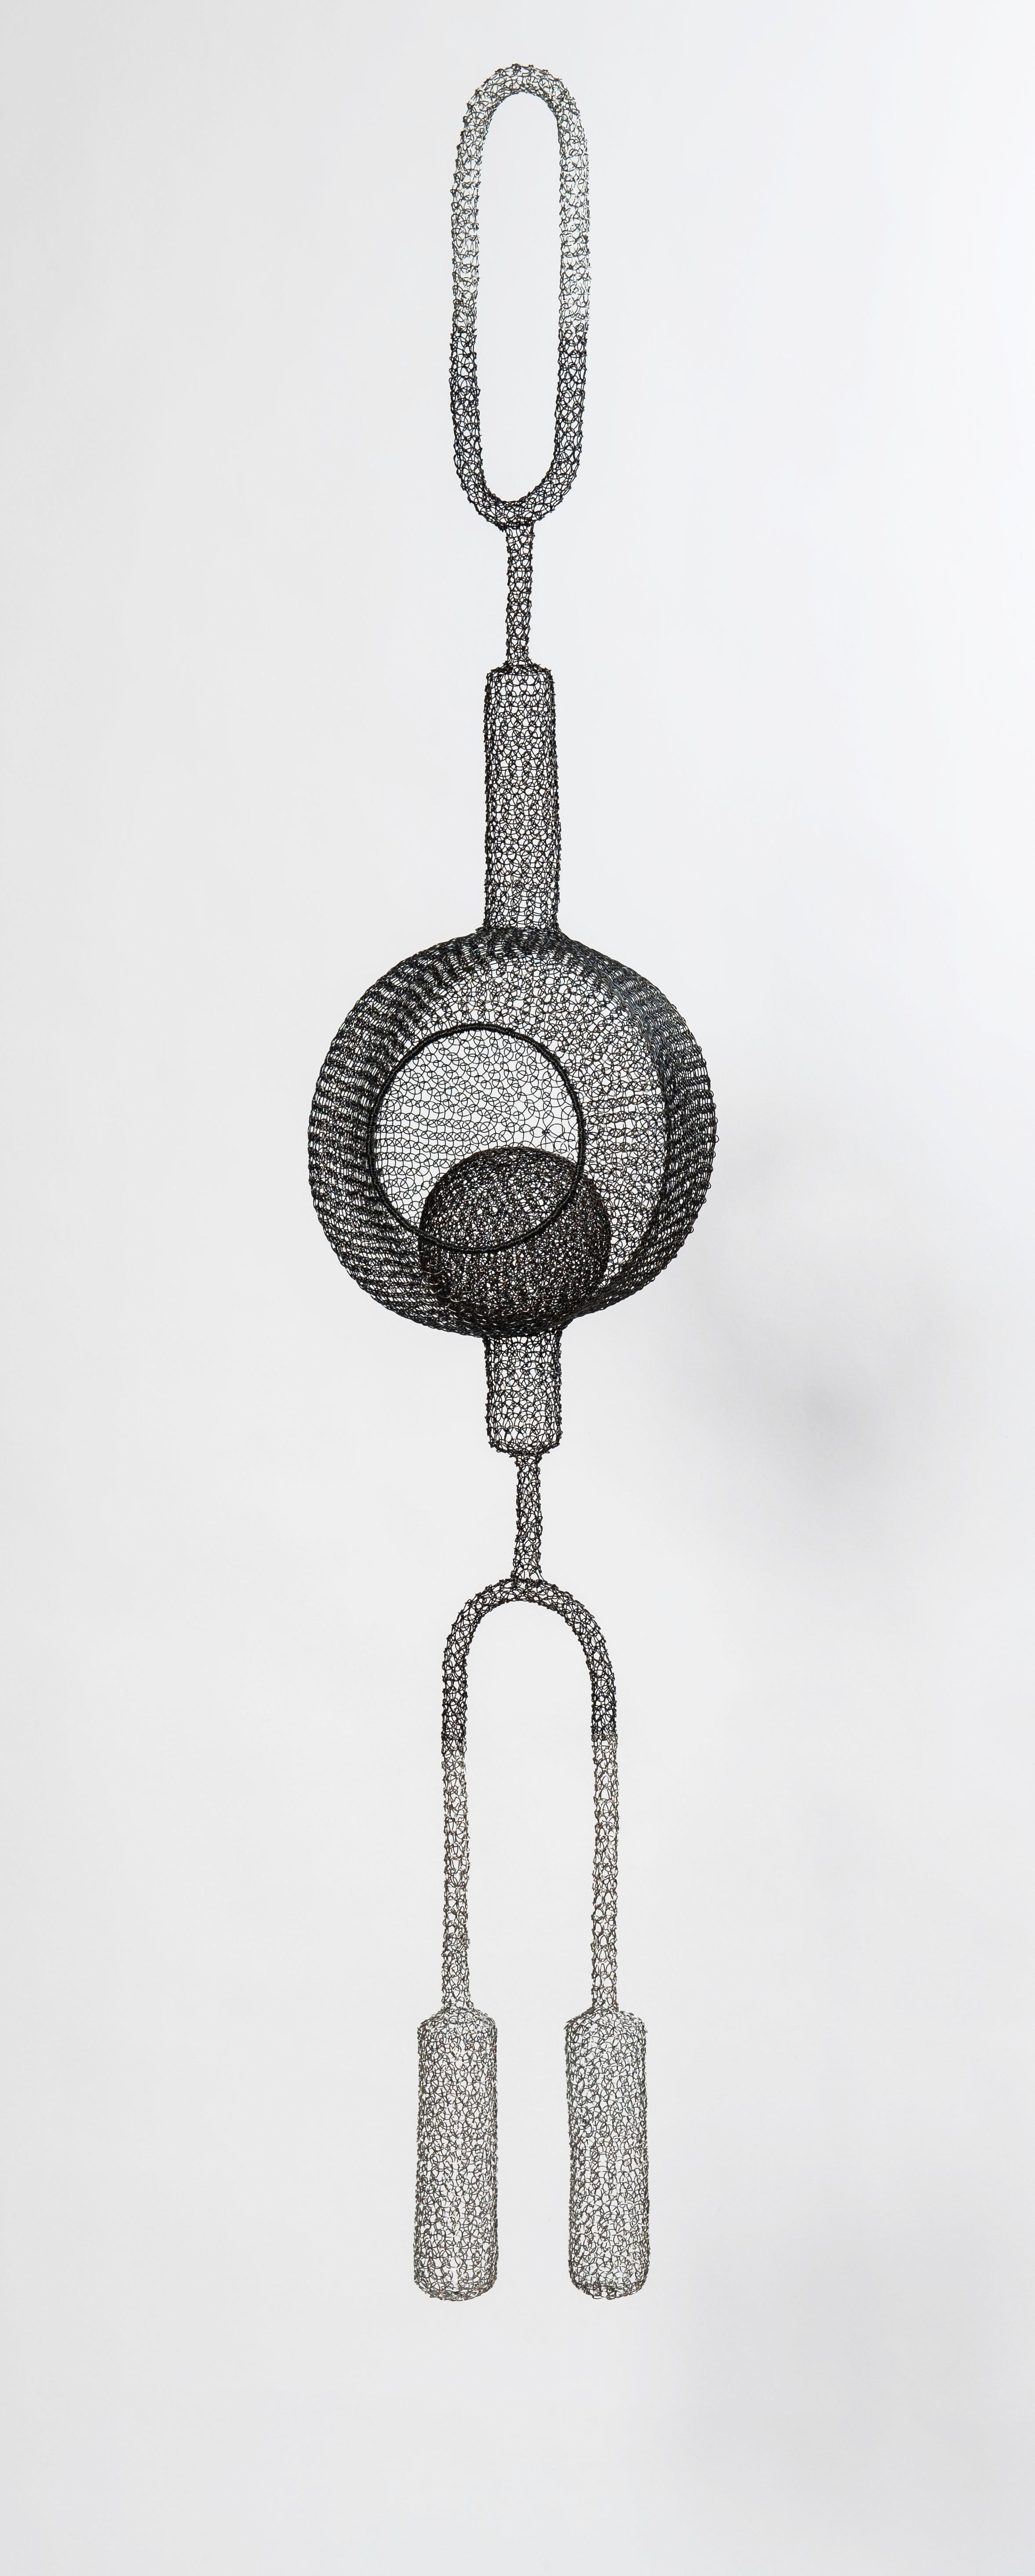 Delphine Grandvaux Abstract Sculpture - "Necklace", Hand-Knitted Airy Transparent Pendant Grey Metallic Sculpture